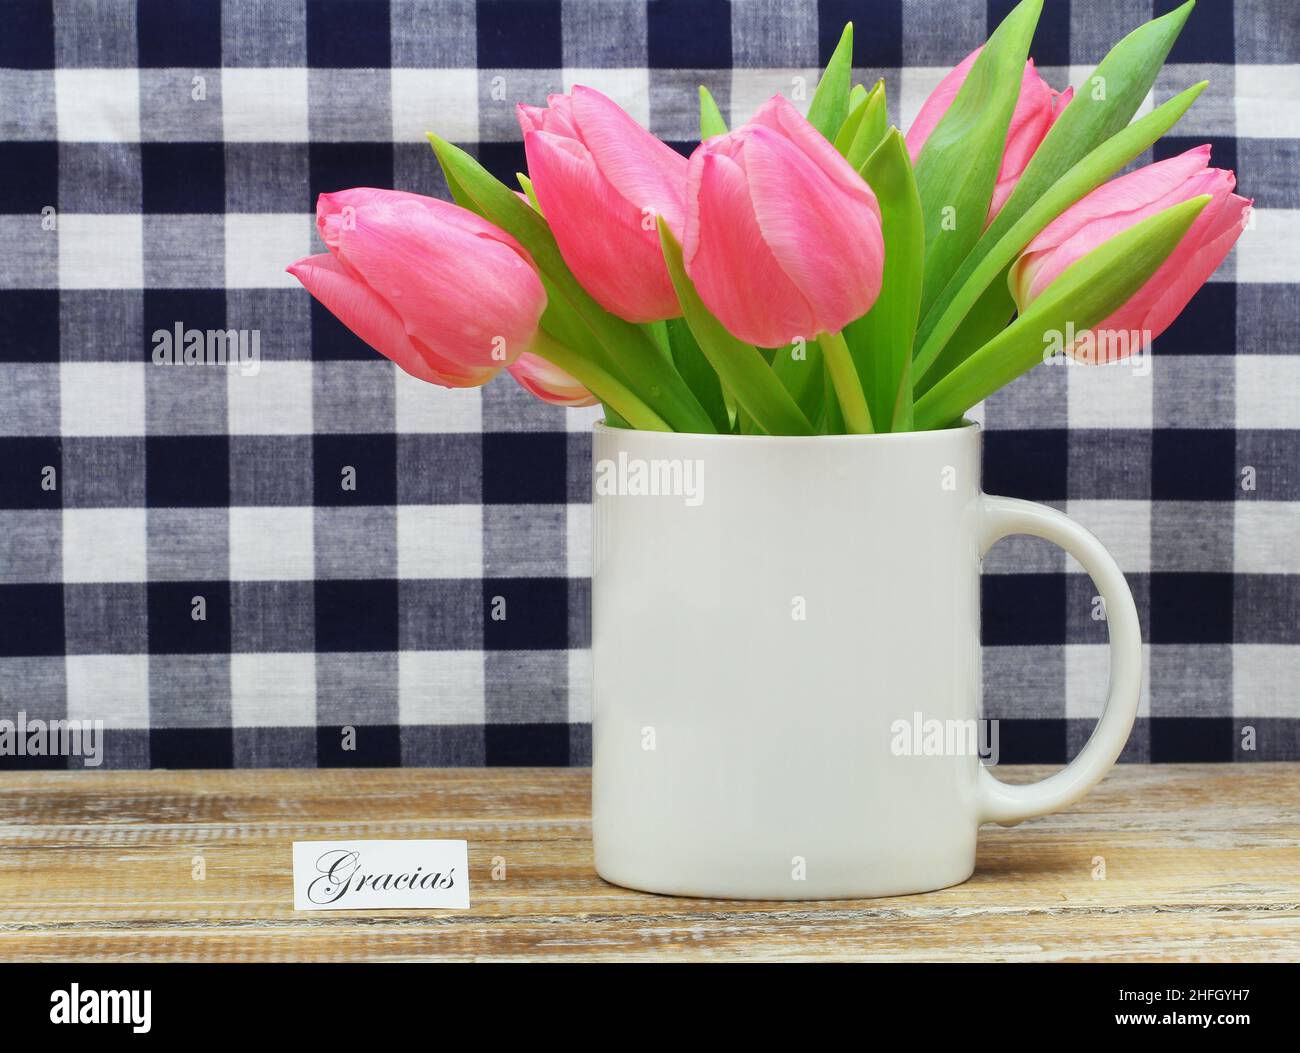 Gracias (thank you in Spanish) card with mug full of pink tulips Stock Photo